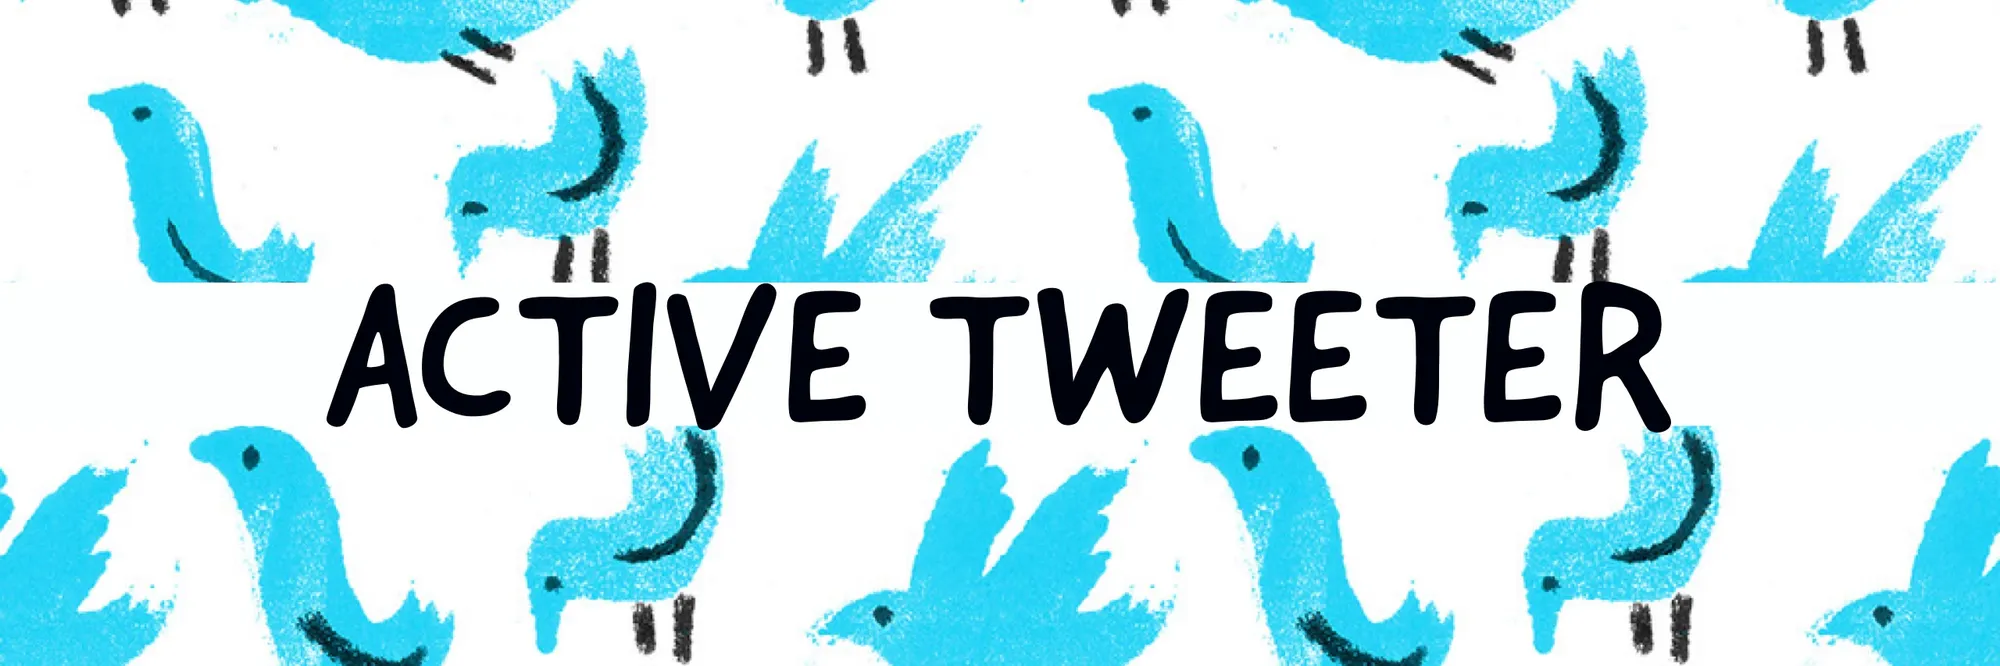 Illustrated Twitter Header with Blue Birds